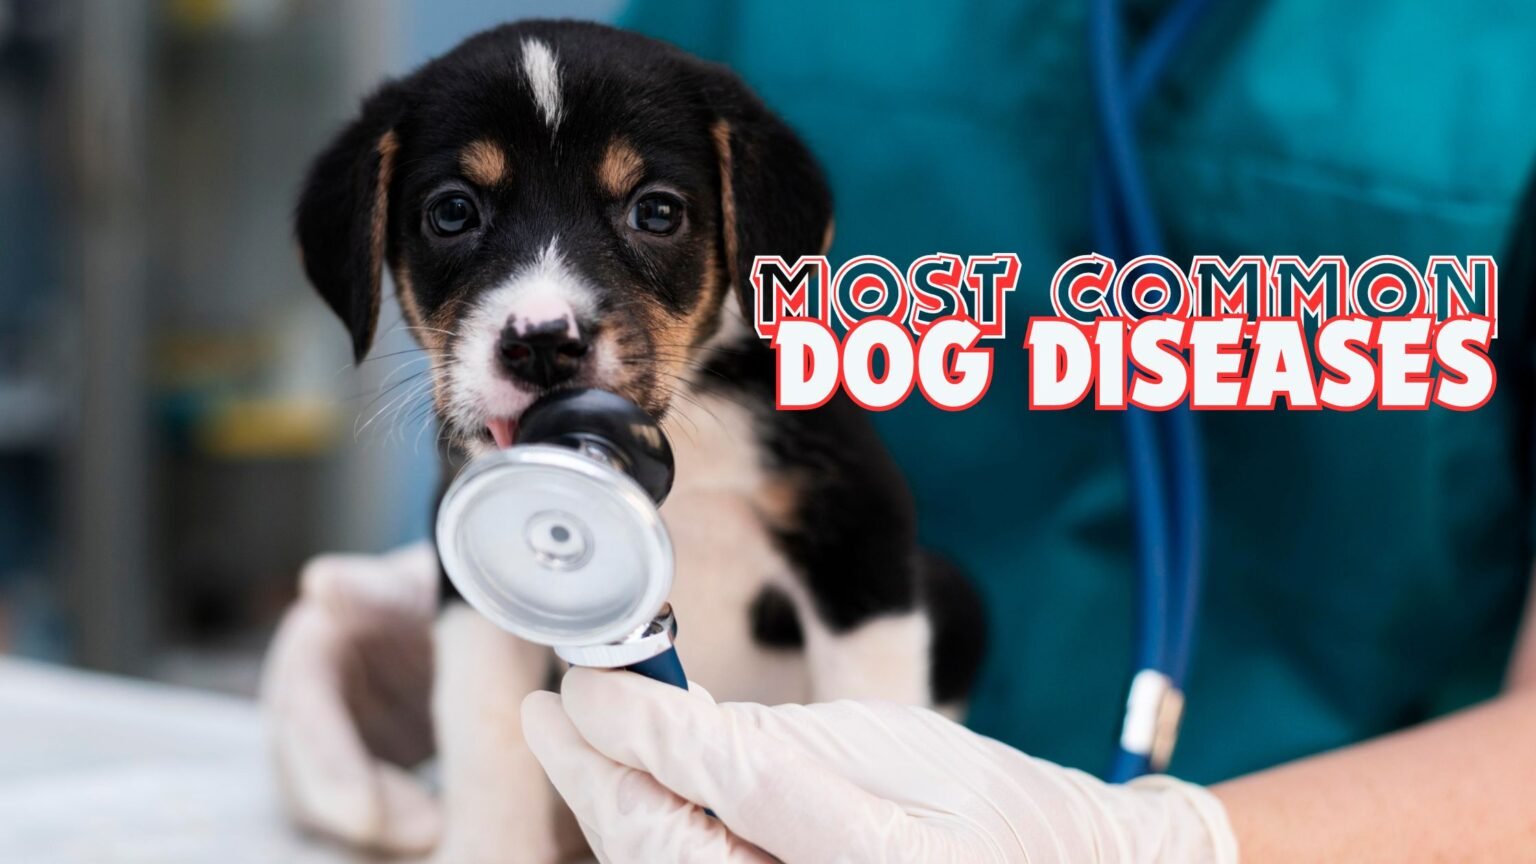 MOST COMMON DOG DISEASES